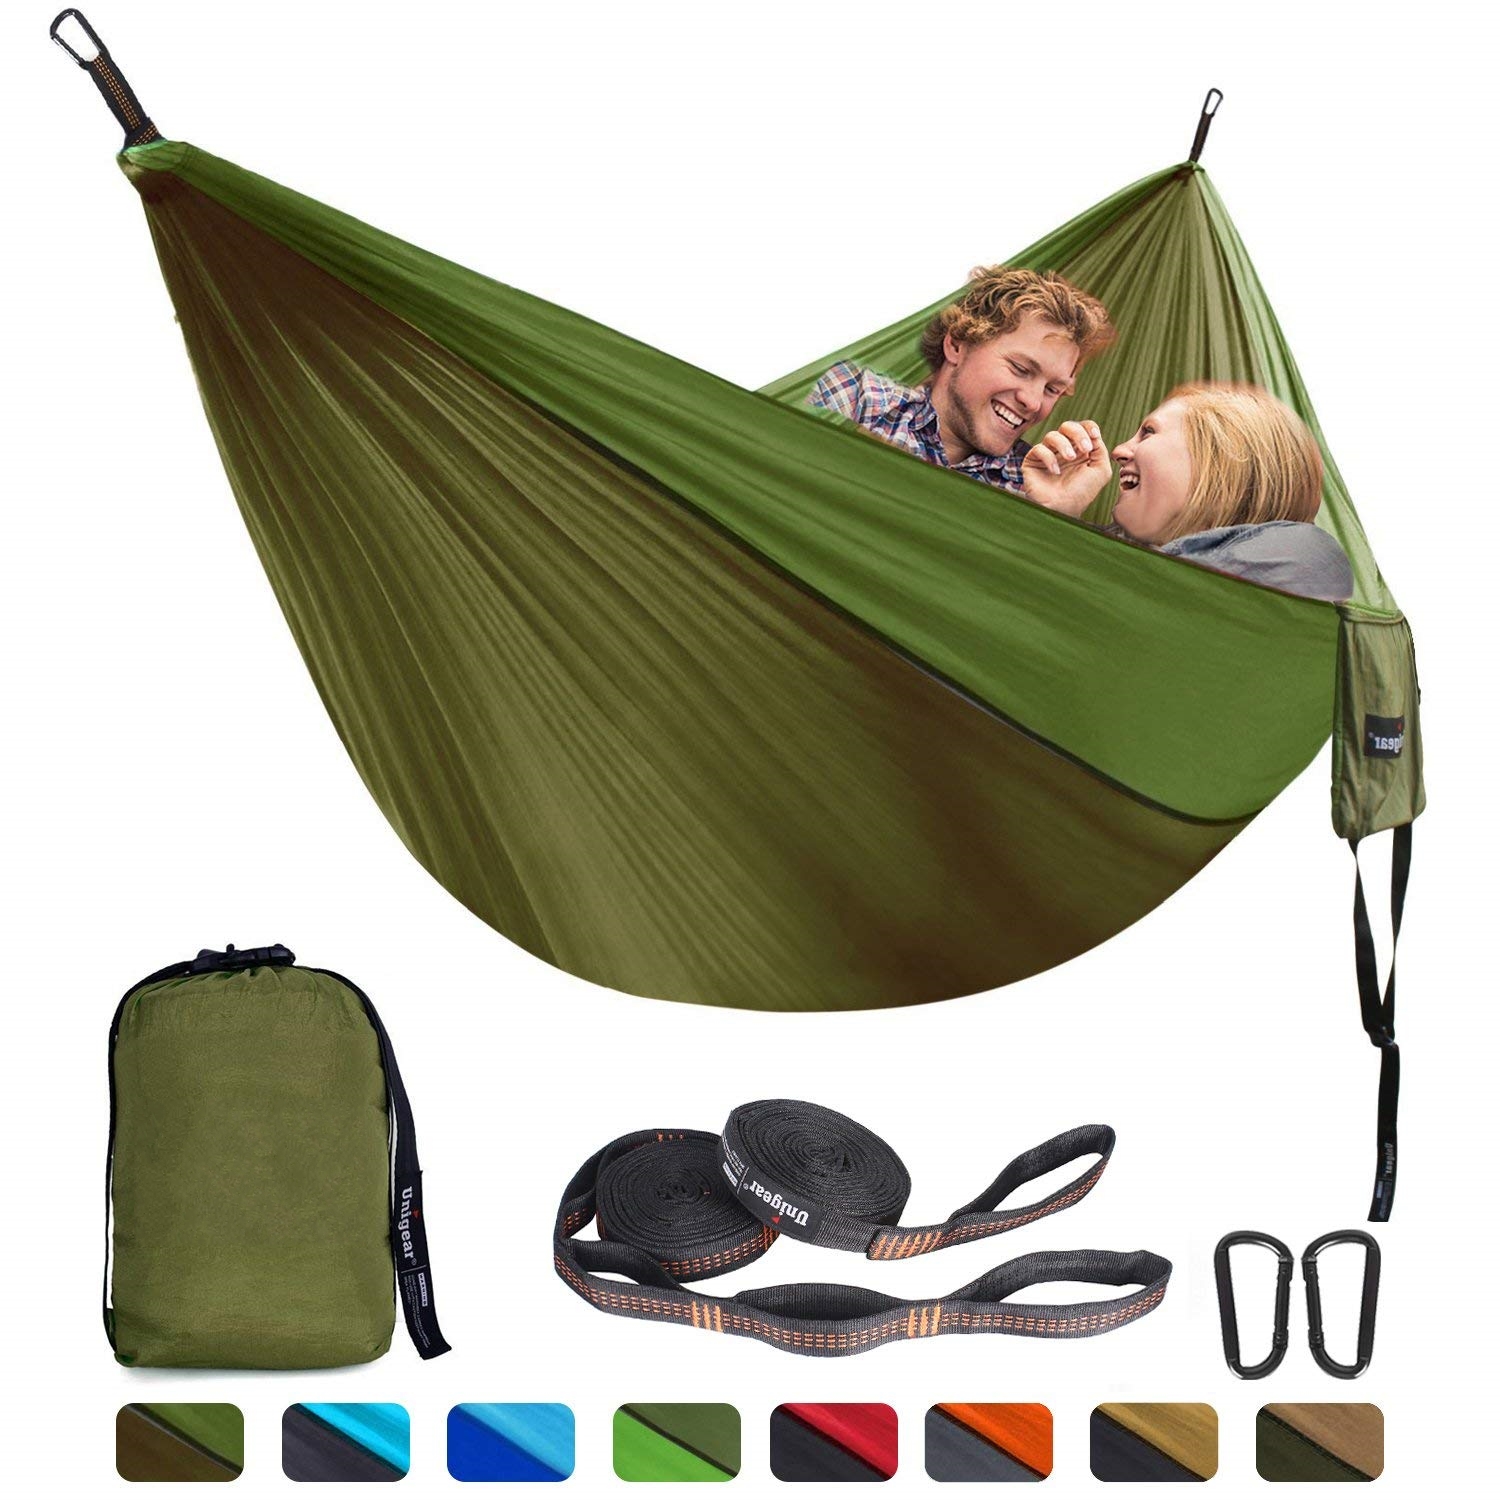 oaskys Camping Hammock Double with 2 Tree Straps Made of Portable Lightweight Nylon Parachute for Backpacking,Travel,Beach,Yard and Outdoor Survival 